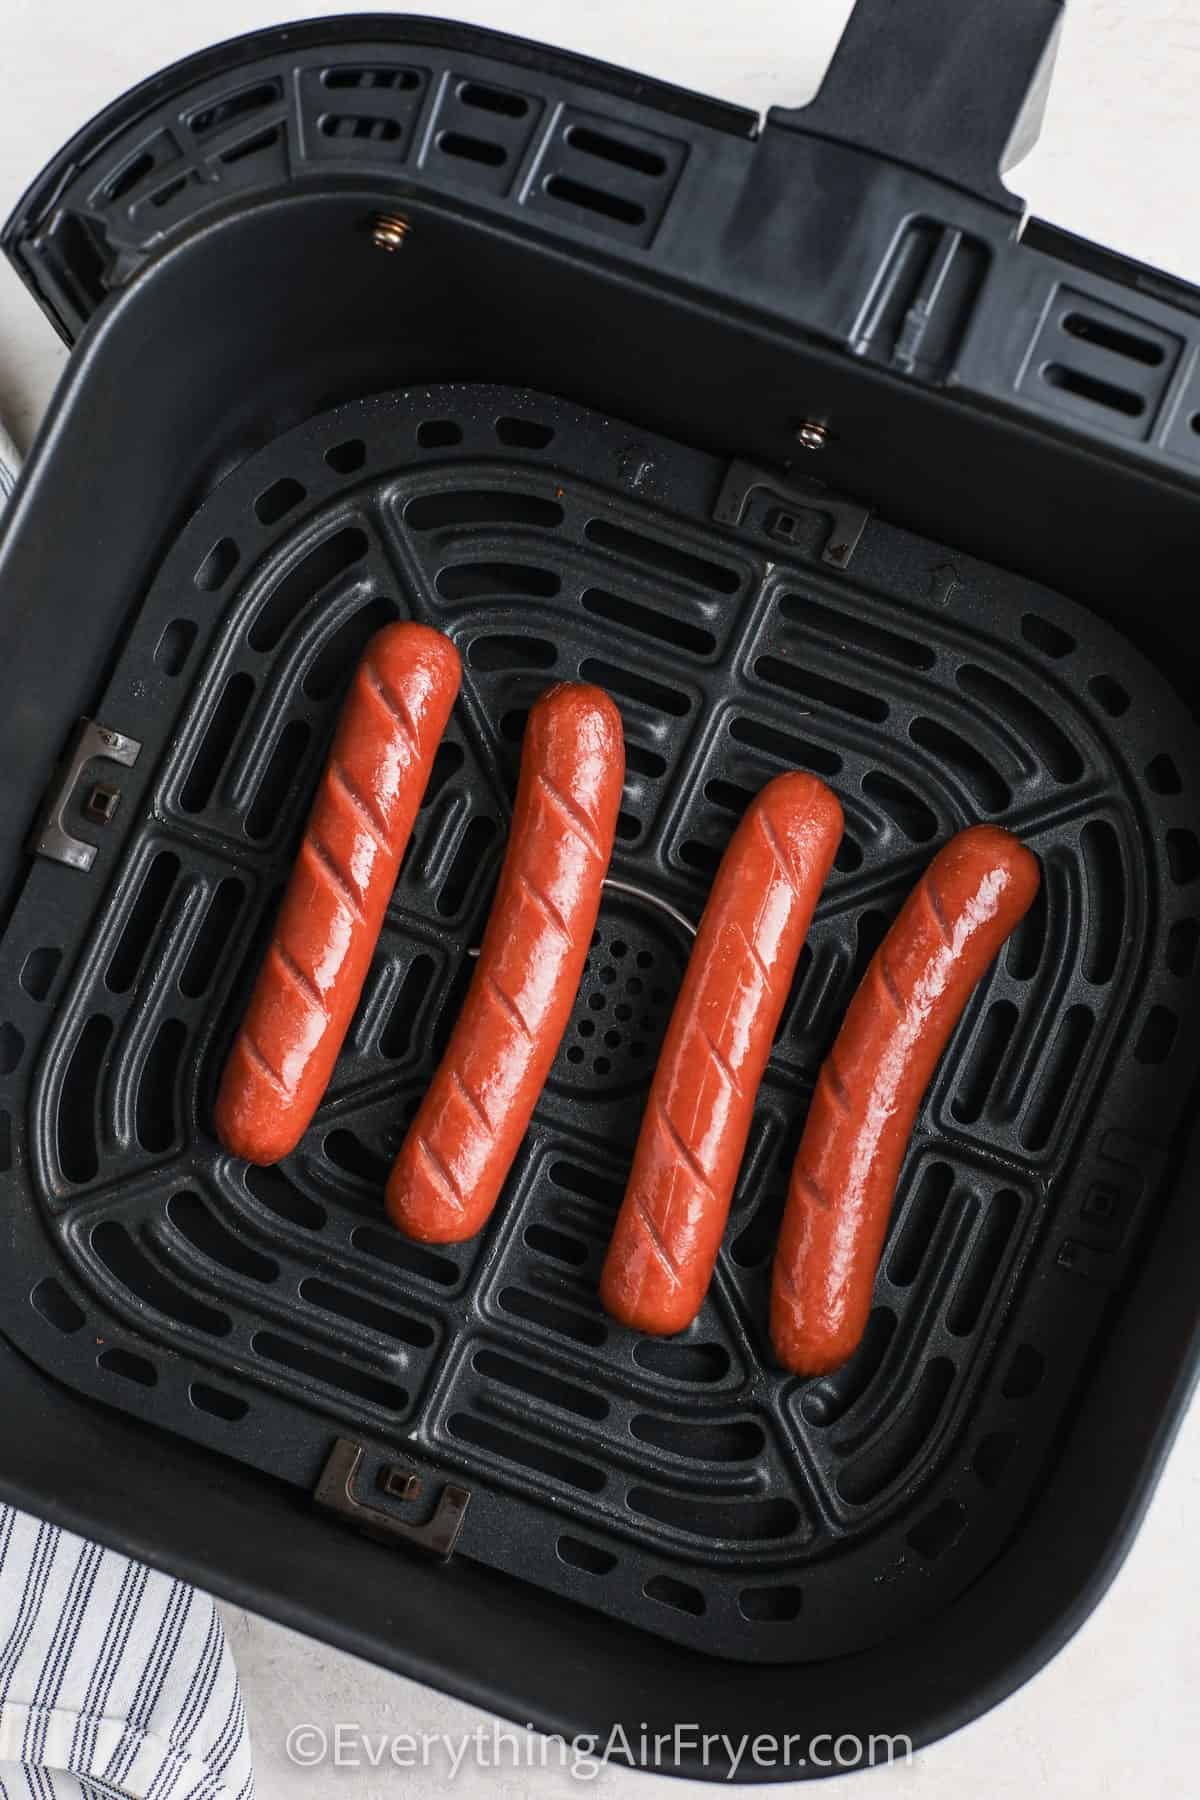 cooking hot dogs to make Air Fryer Hot Dogs